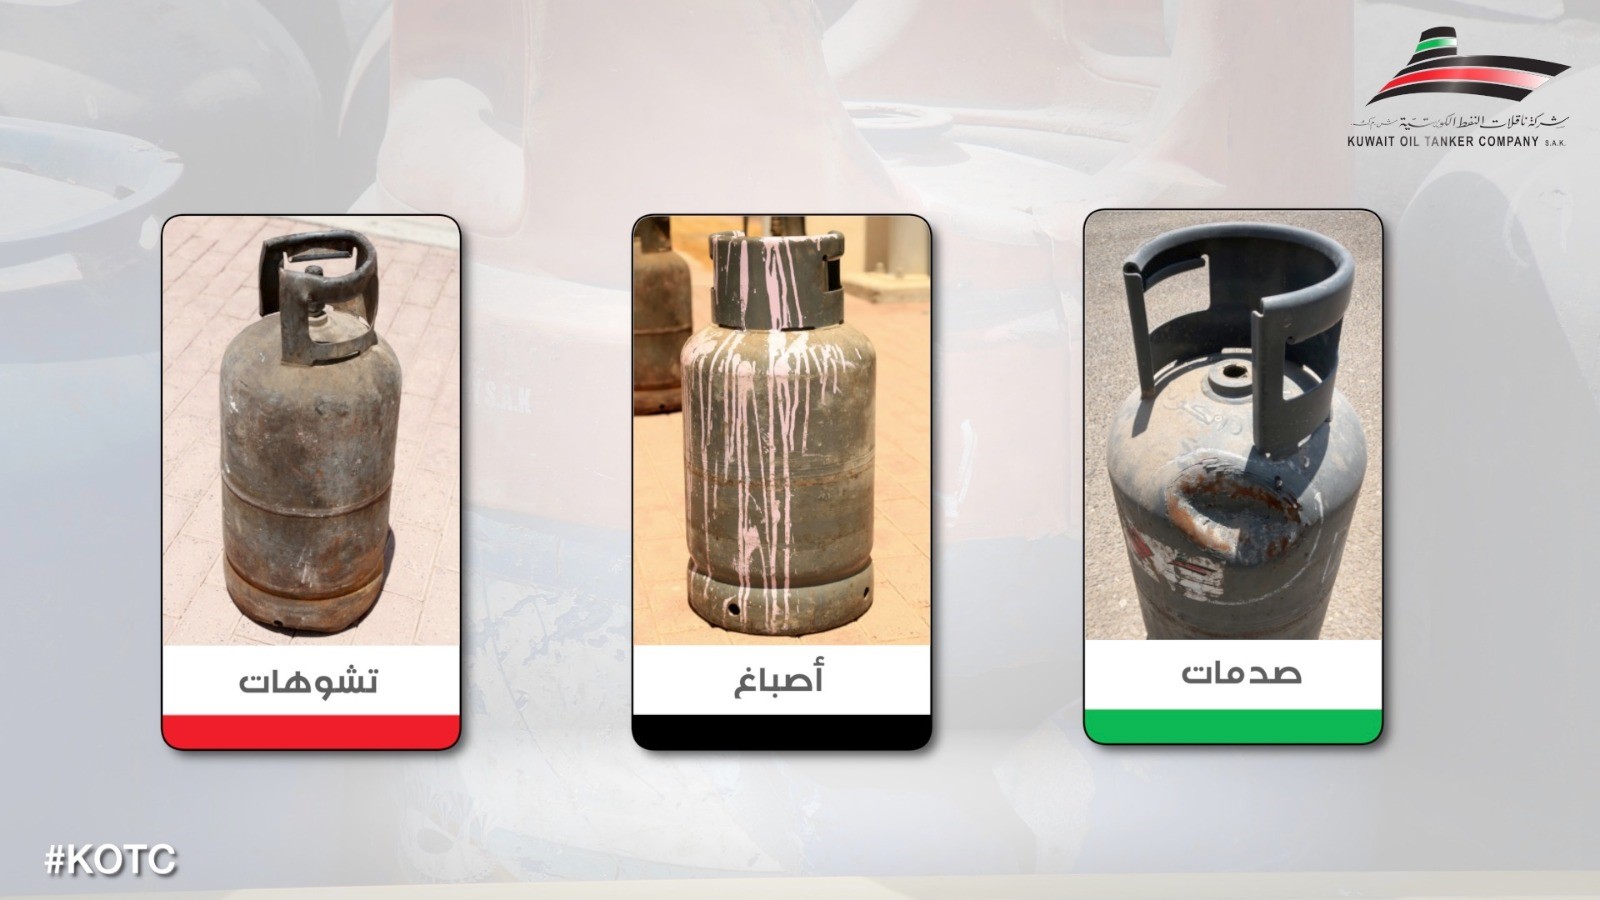 Examples of misuse of gas cylinders